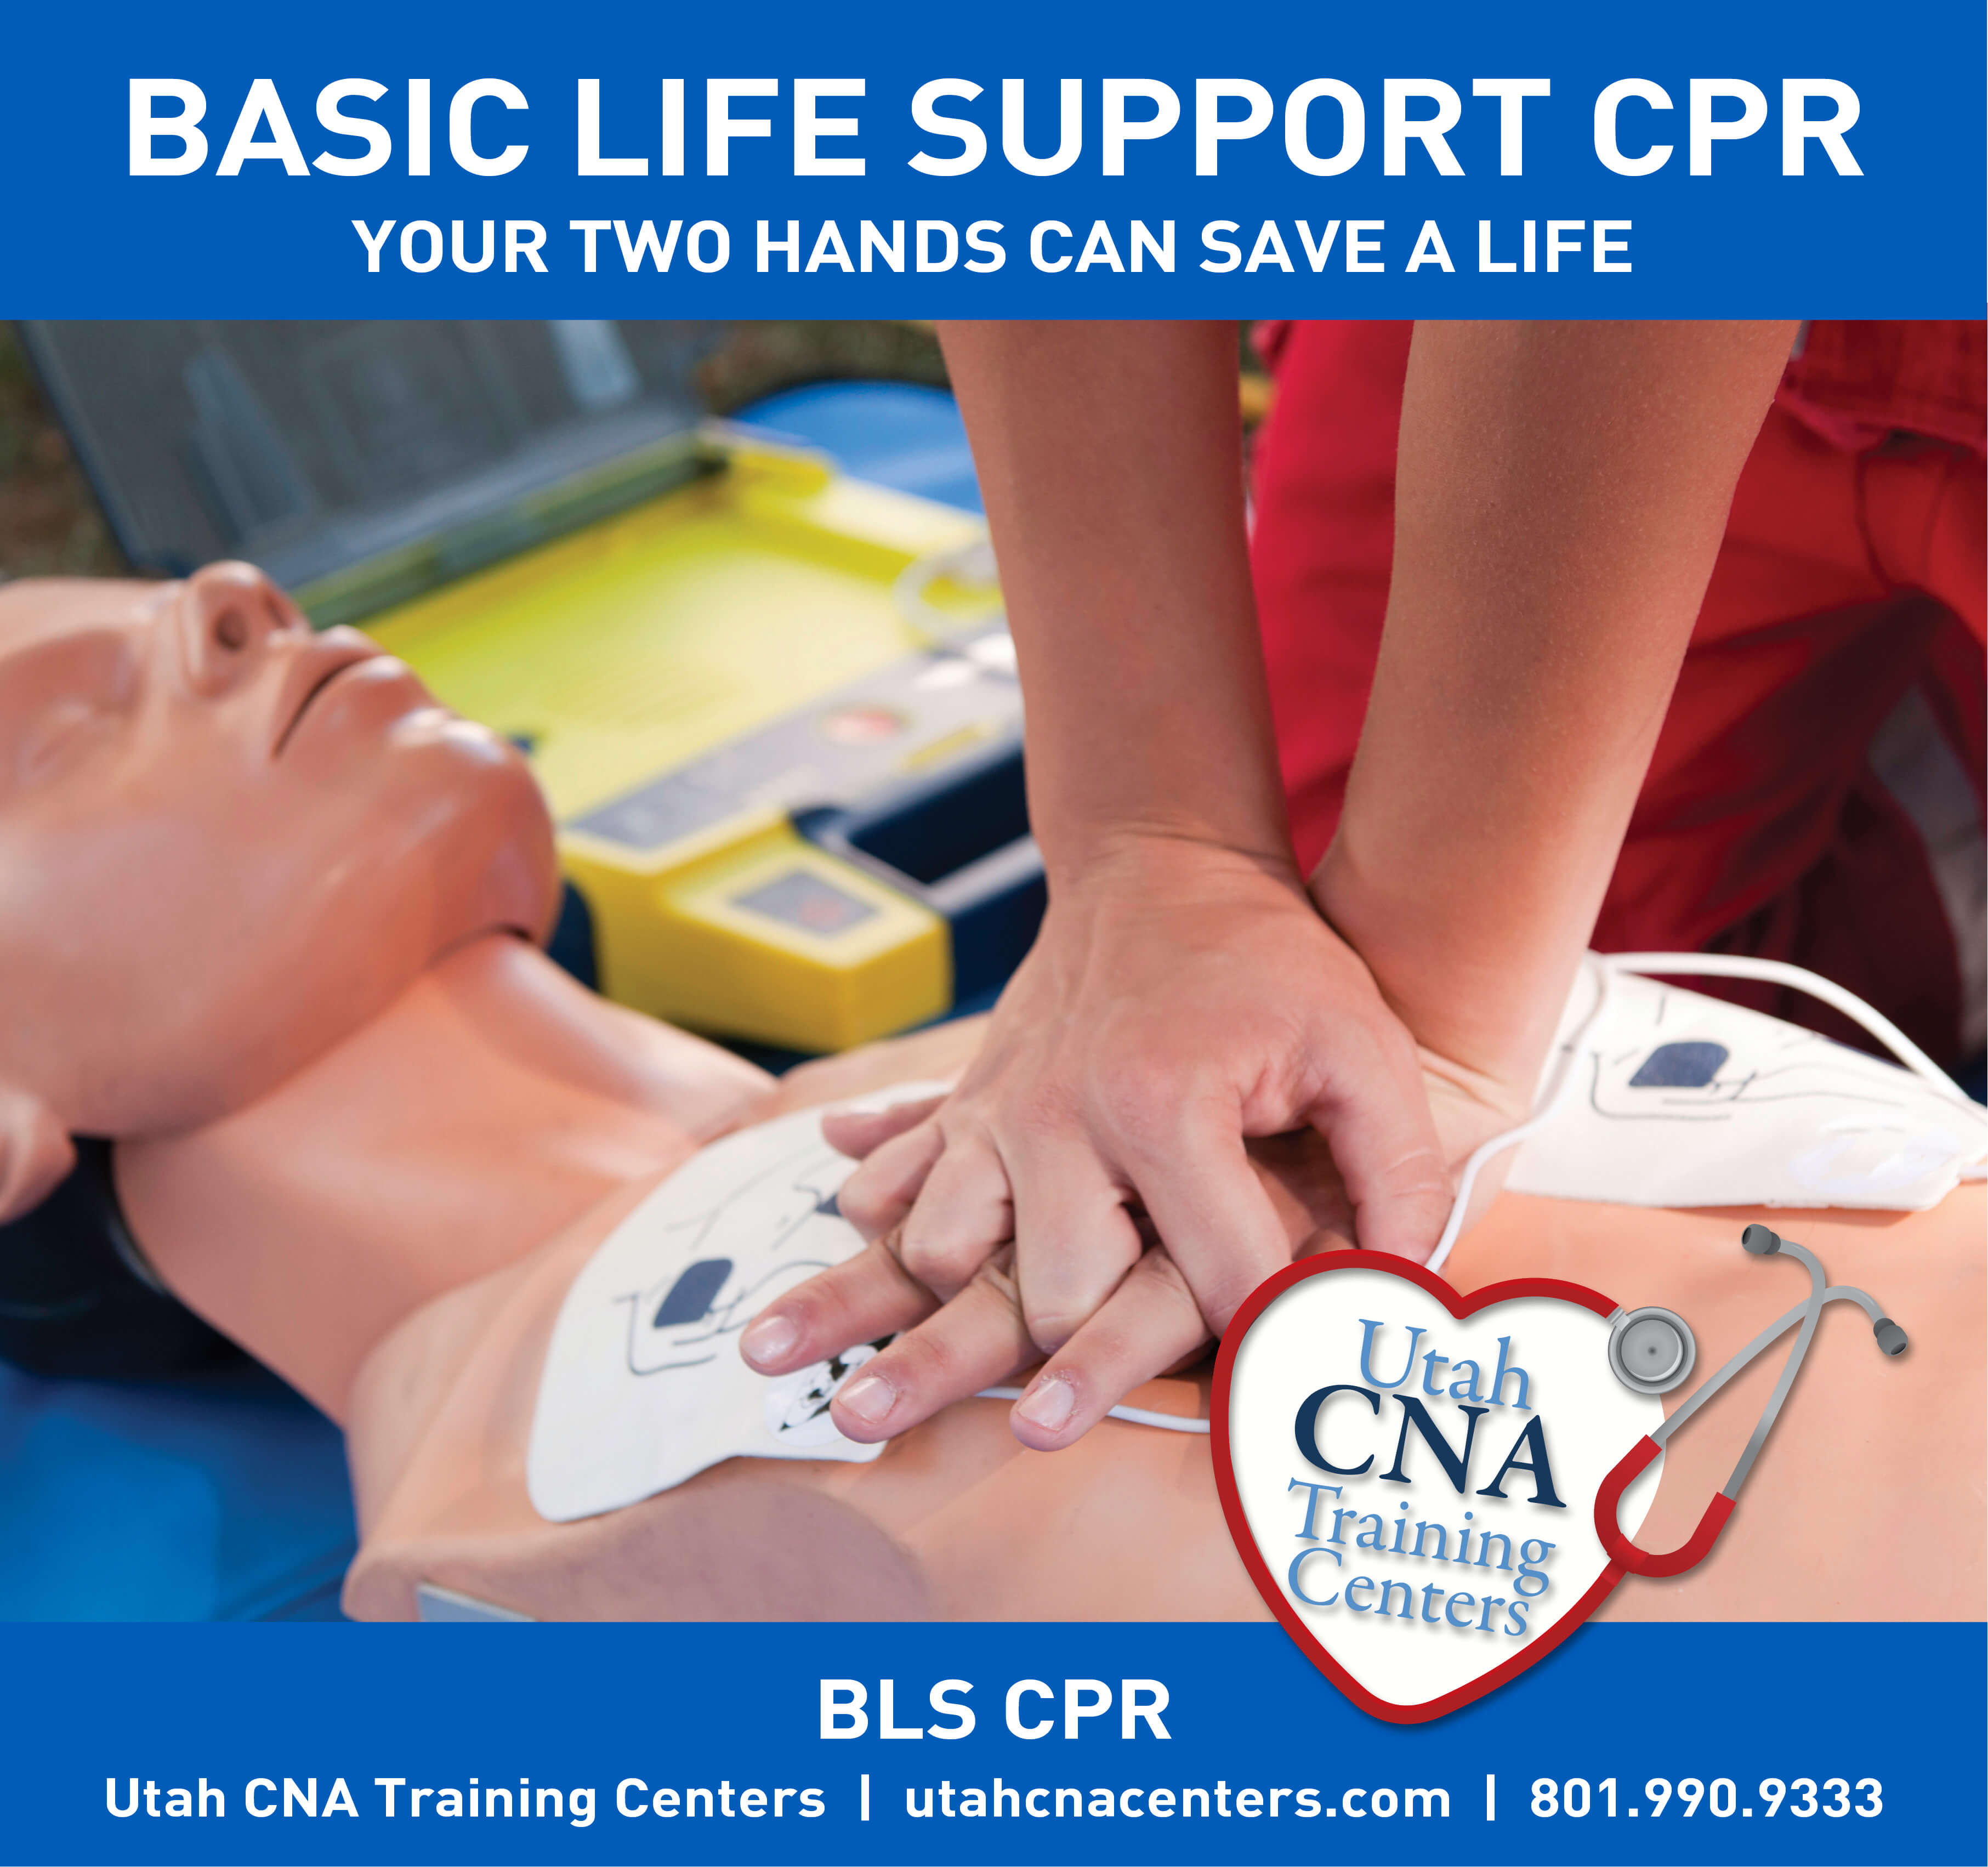 Healthcare Basic Life Support Cpr Utah Cna Training Centers SexiezPicz Web Porn